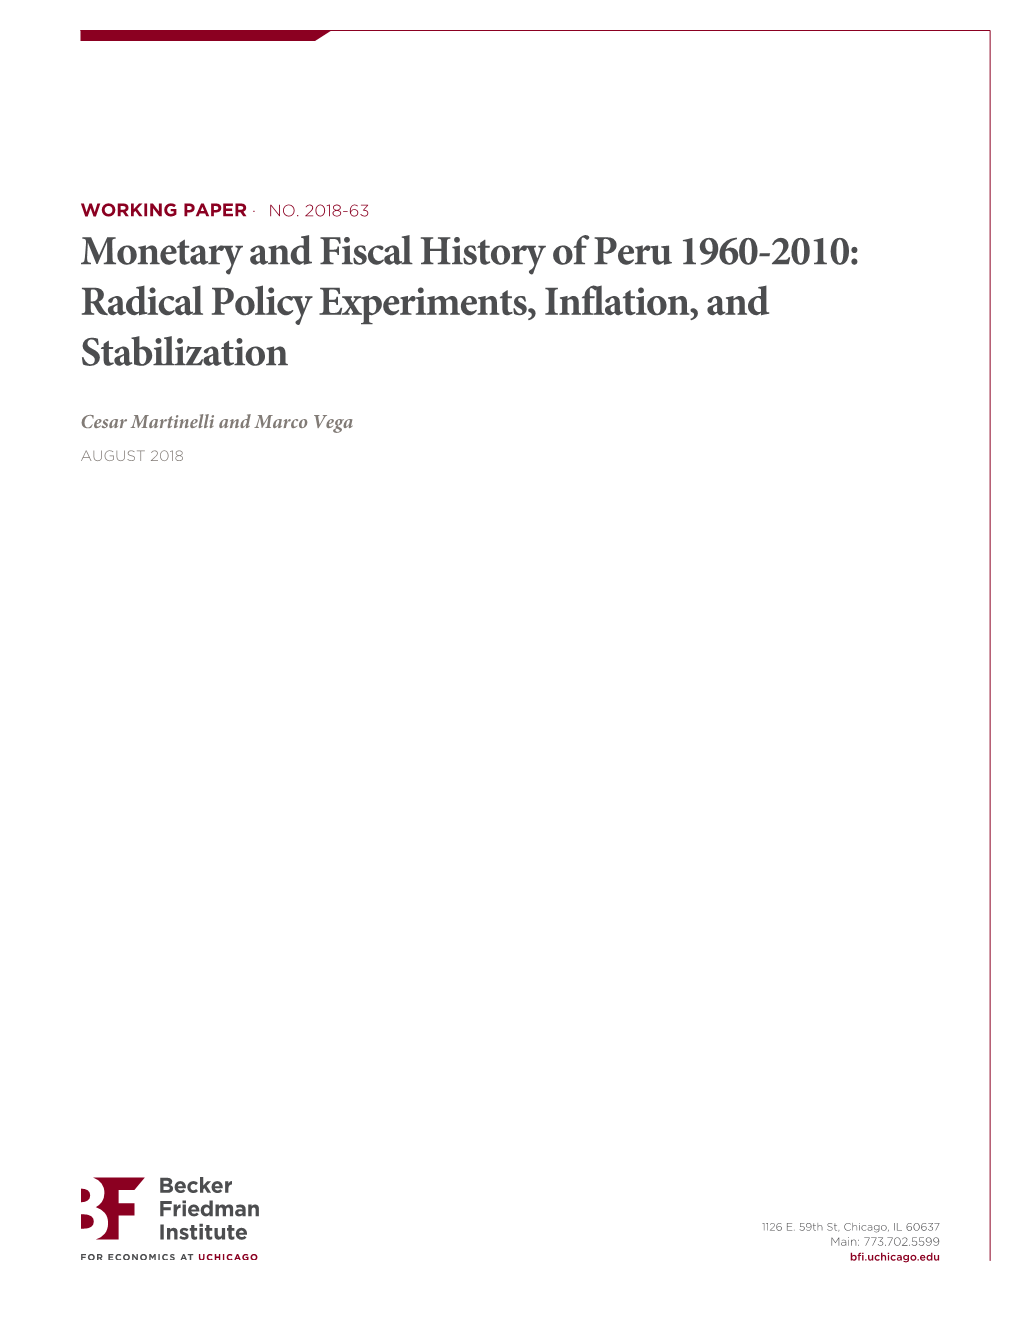 Monetary and Fiscal History of Peru 1960-2010: Radical Policy Experiments, Inflation, and Stabilization